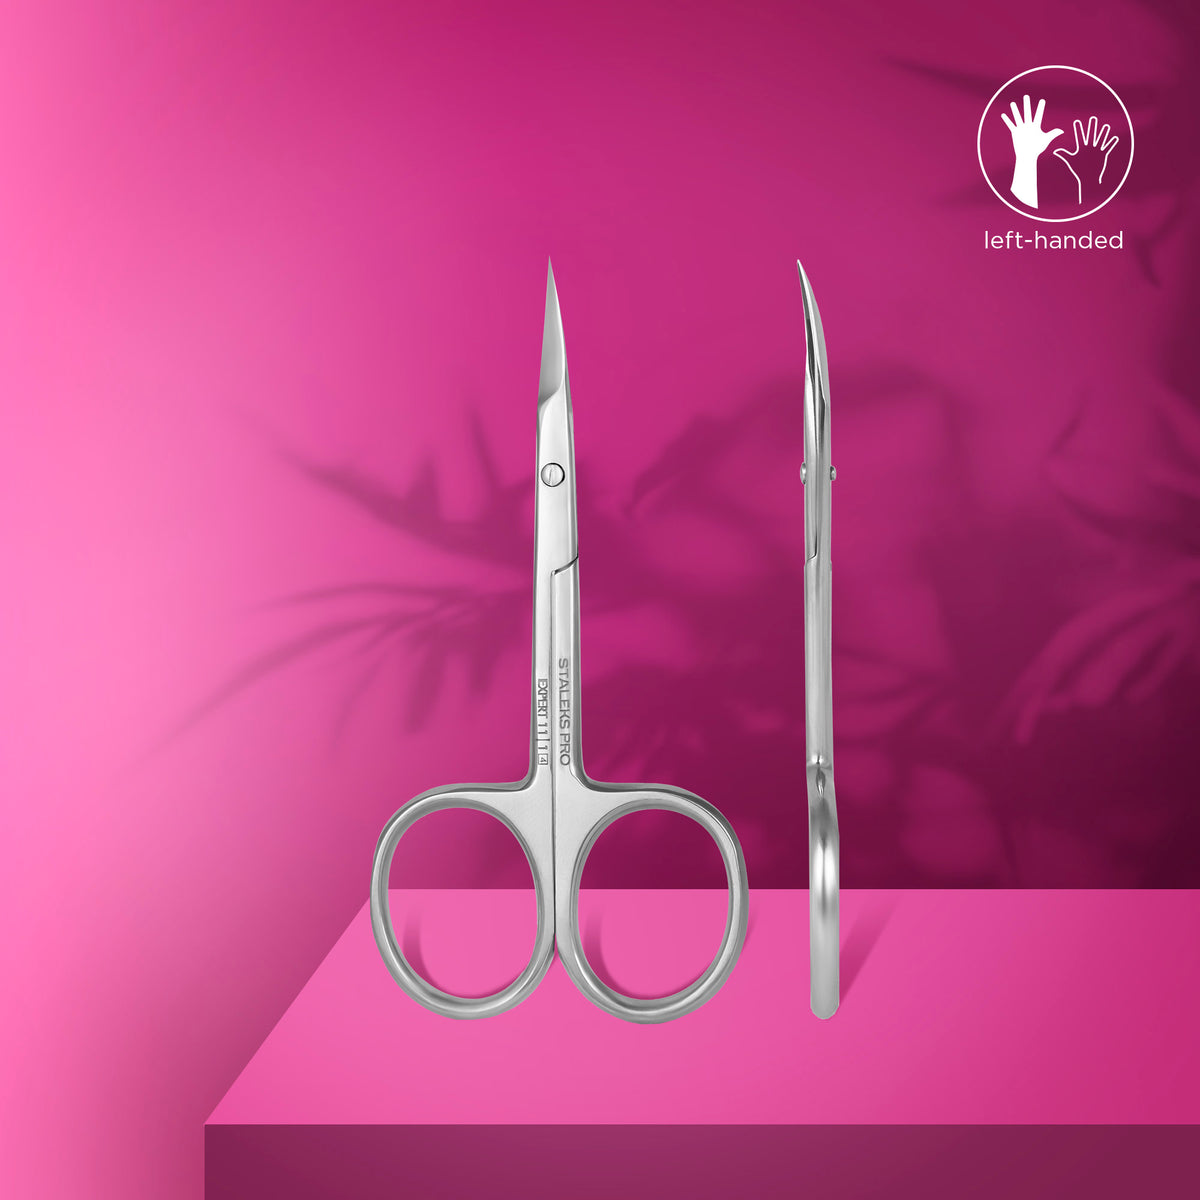 Professional cuticle scissors for left-handed users EXPERT 11 TYPE 1